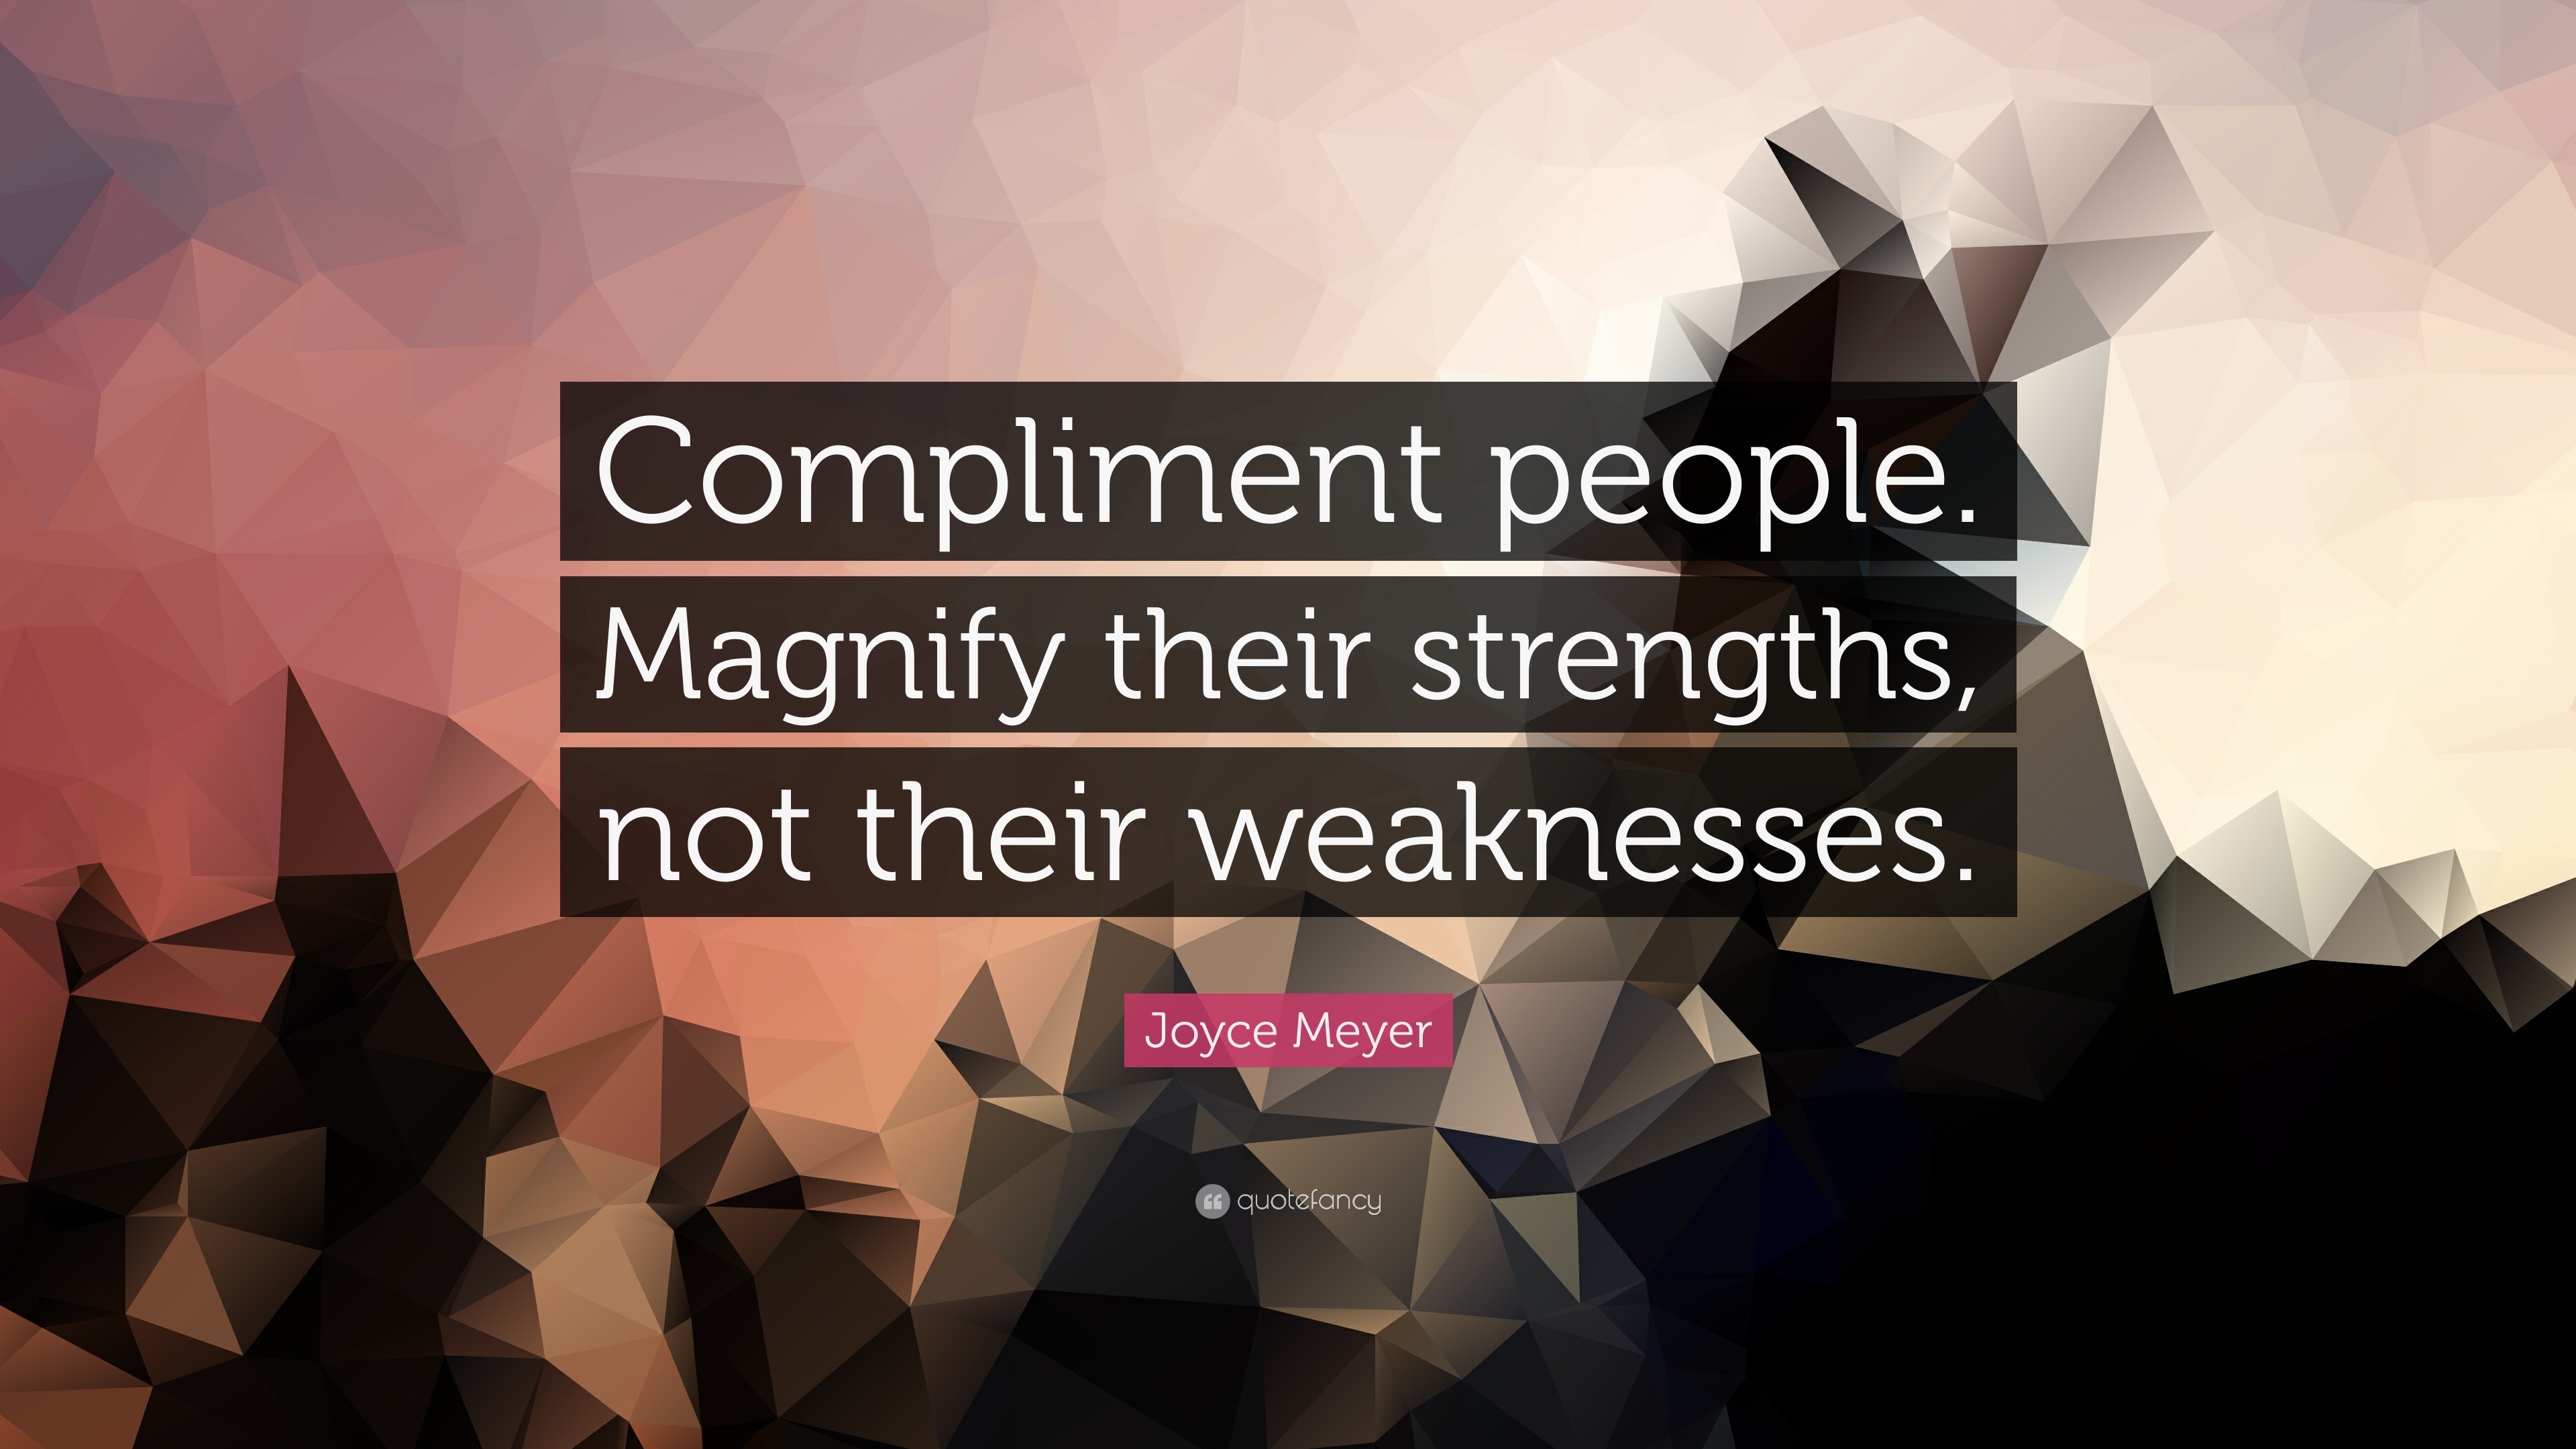 Joyce Meyer Quote: "Compliment people. Magnify their strengths, not their weaknesses." (12 ...